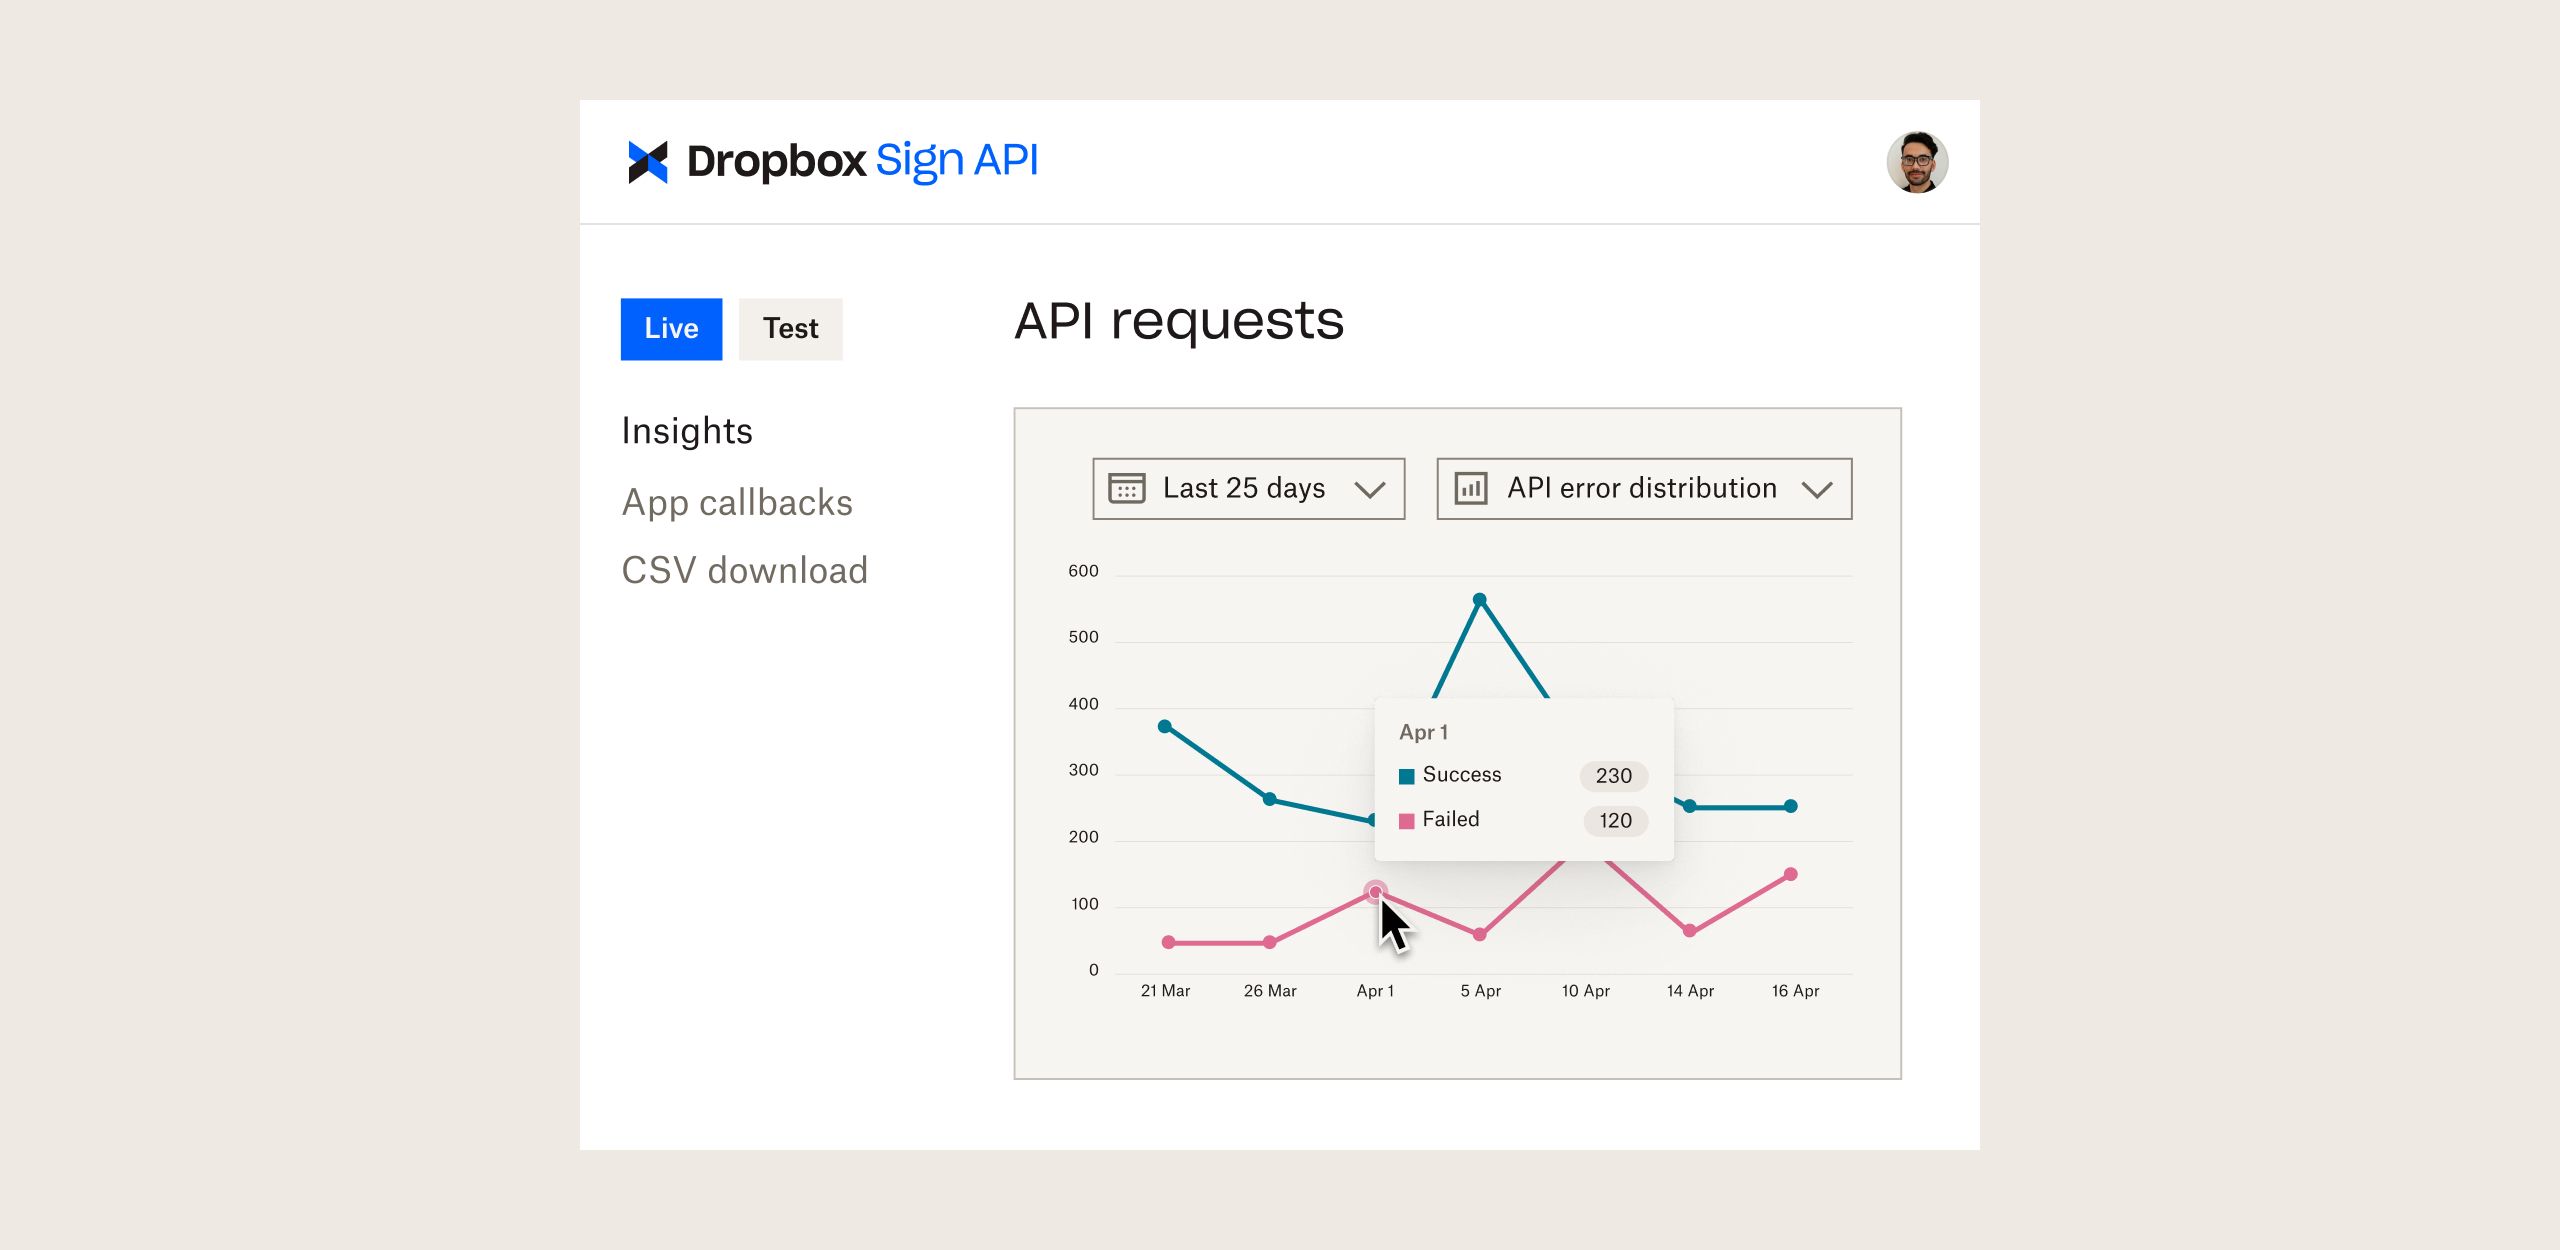 Dropbox Sign API dashboard with graphs showing API requests over time